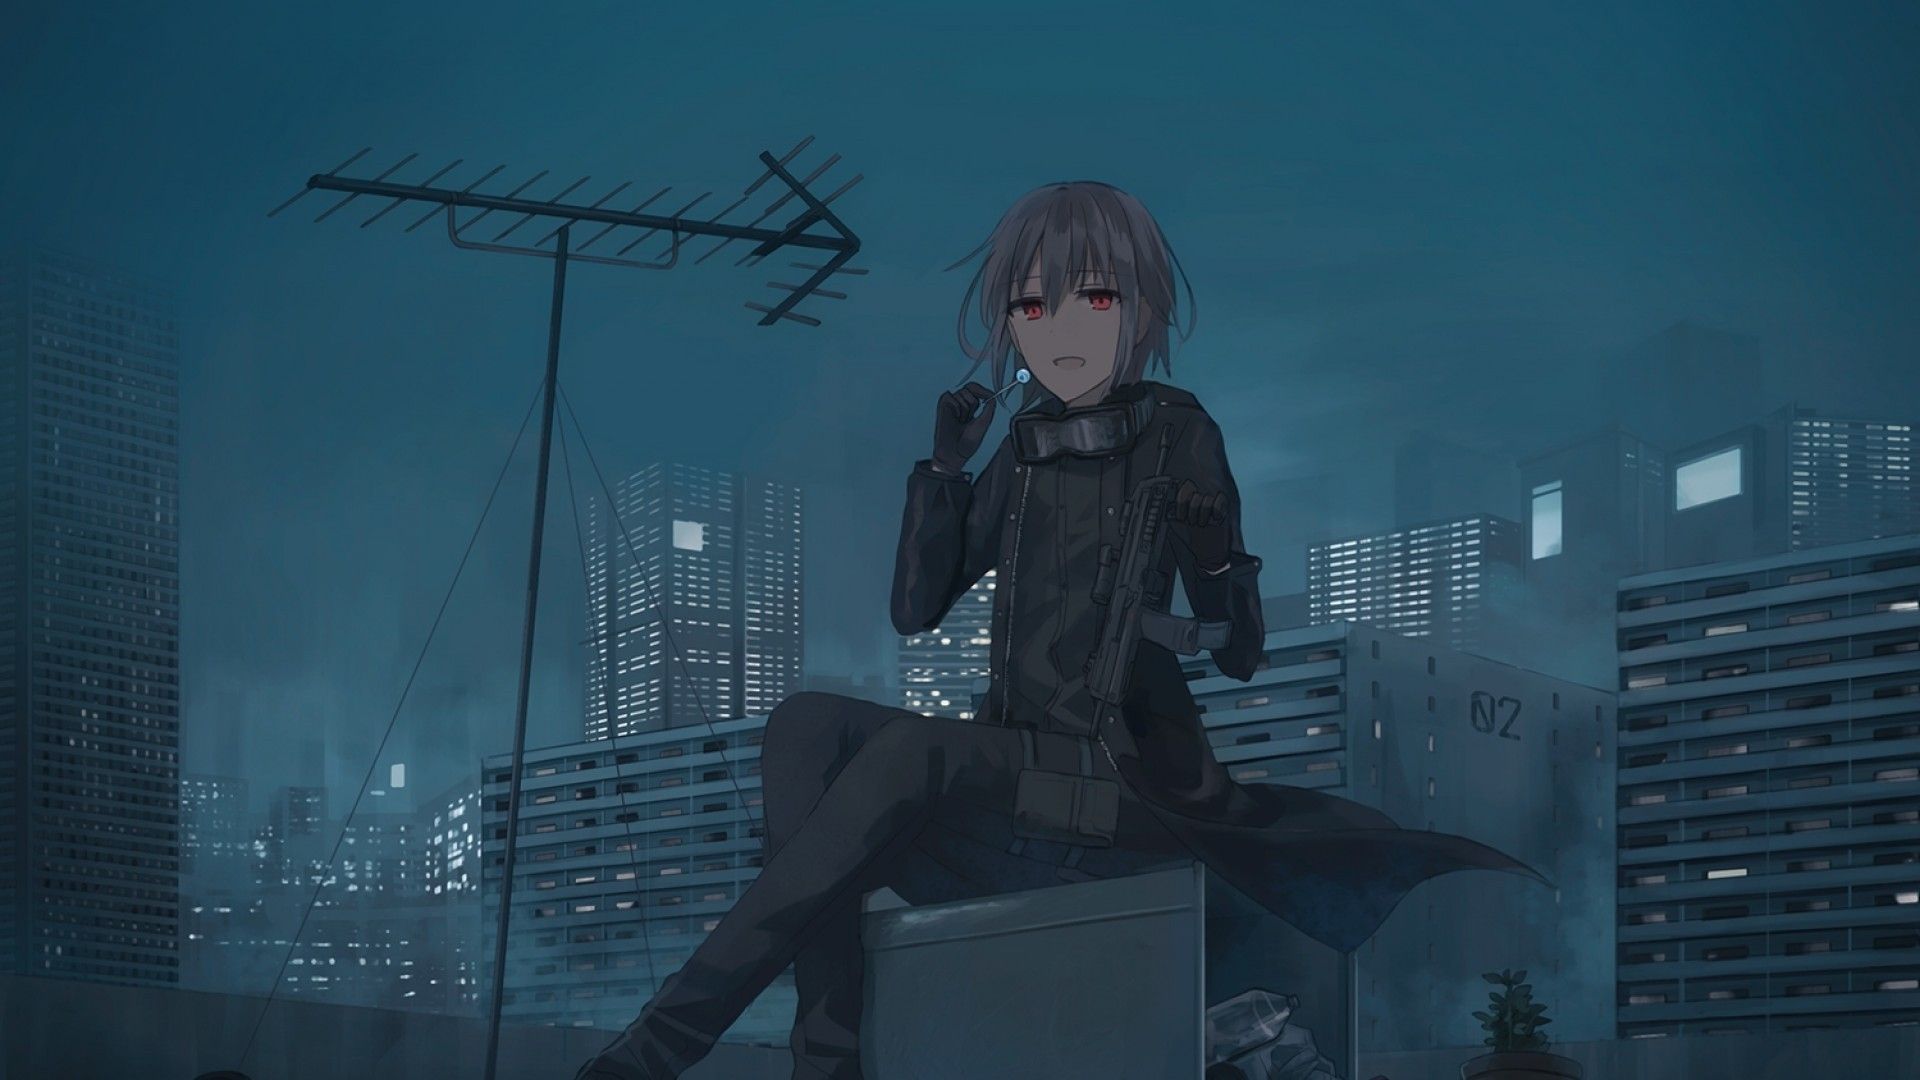 Download 1920x1080 Anime Boy, Candy, Red Eyes, Night, Rooftop, Clean Sky Wallpaper for Widescreen